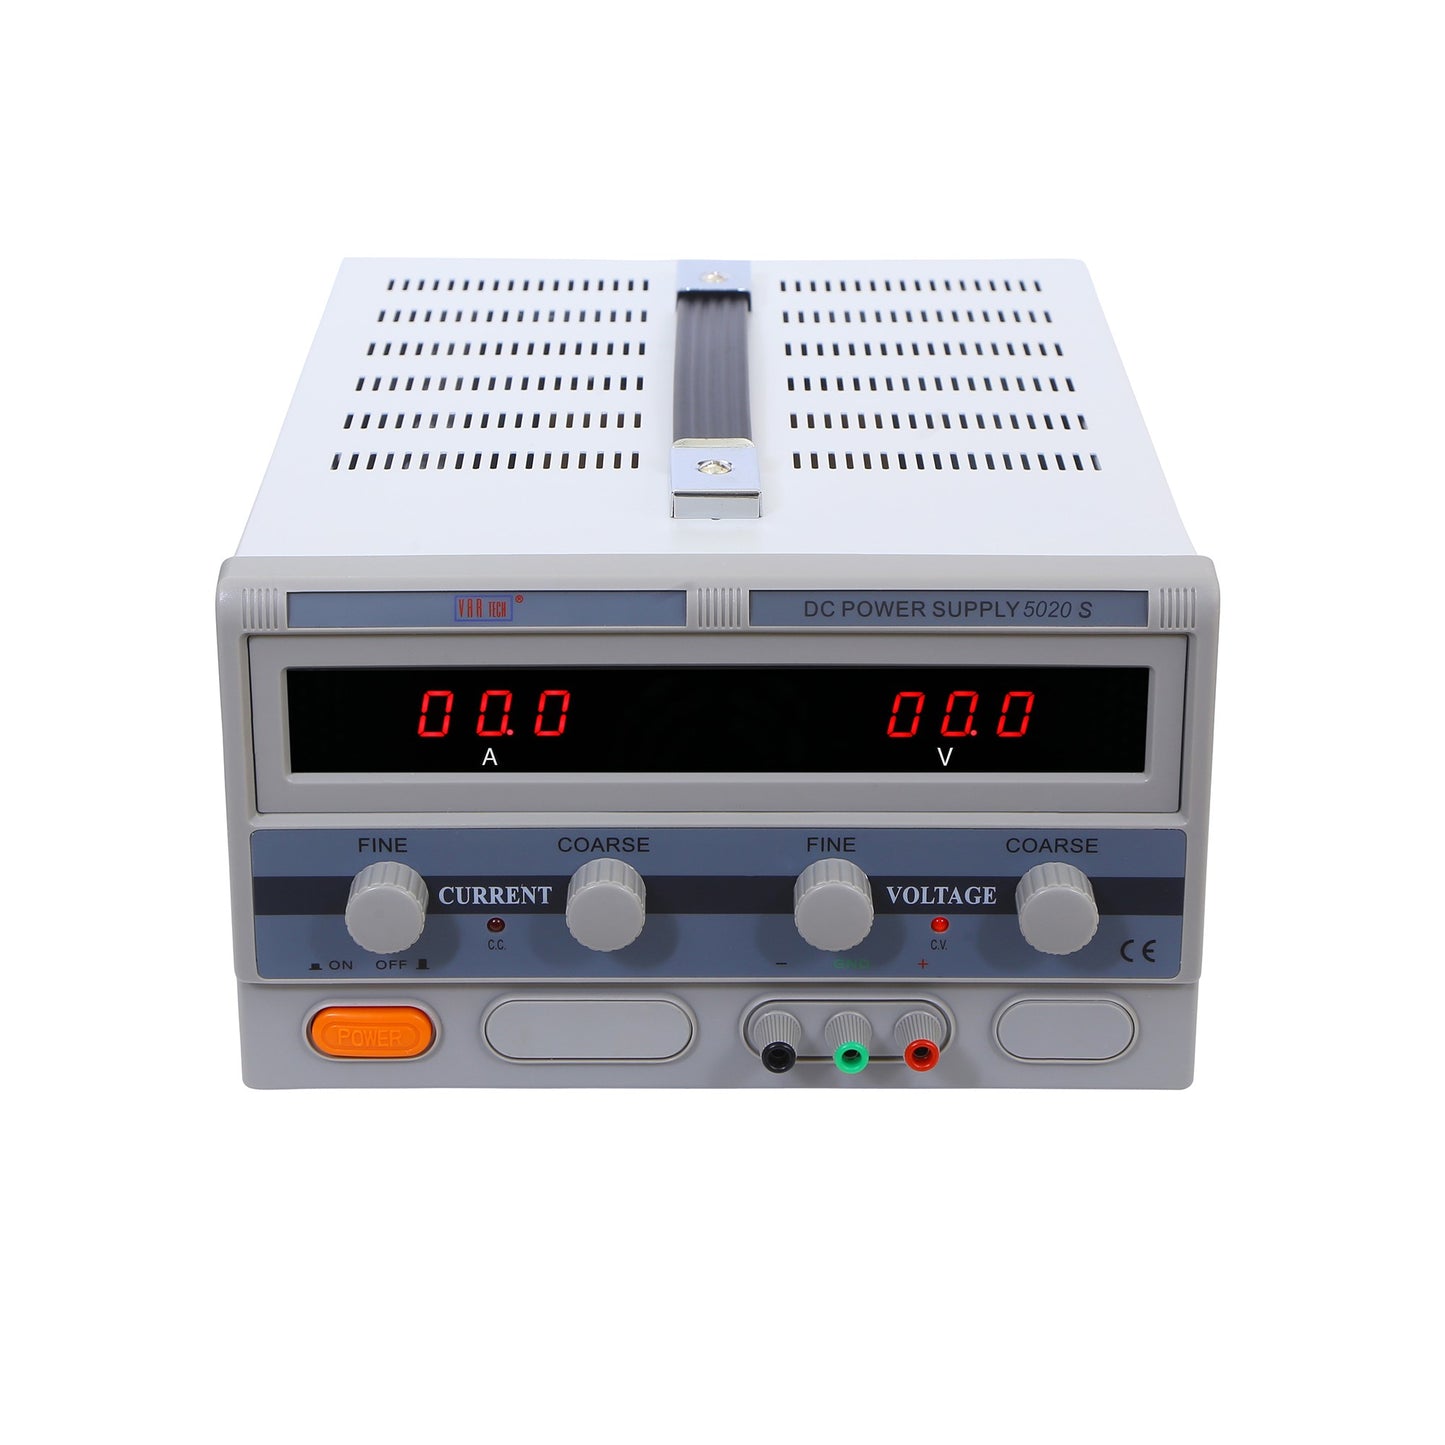 5020 S 50V 20A SMPS based DC regulated power supply